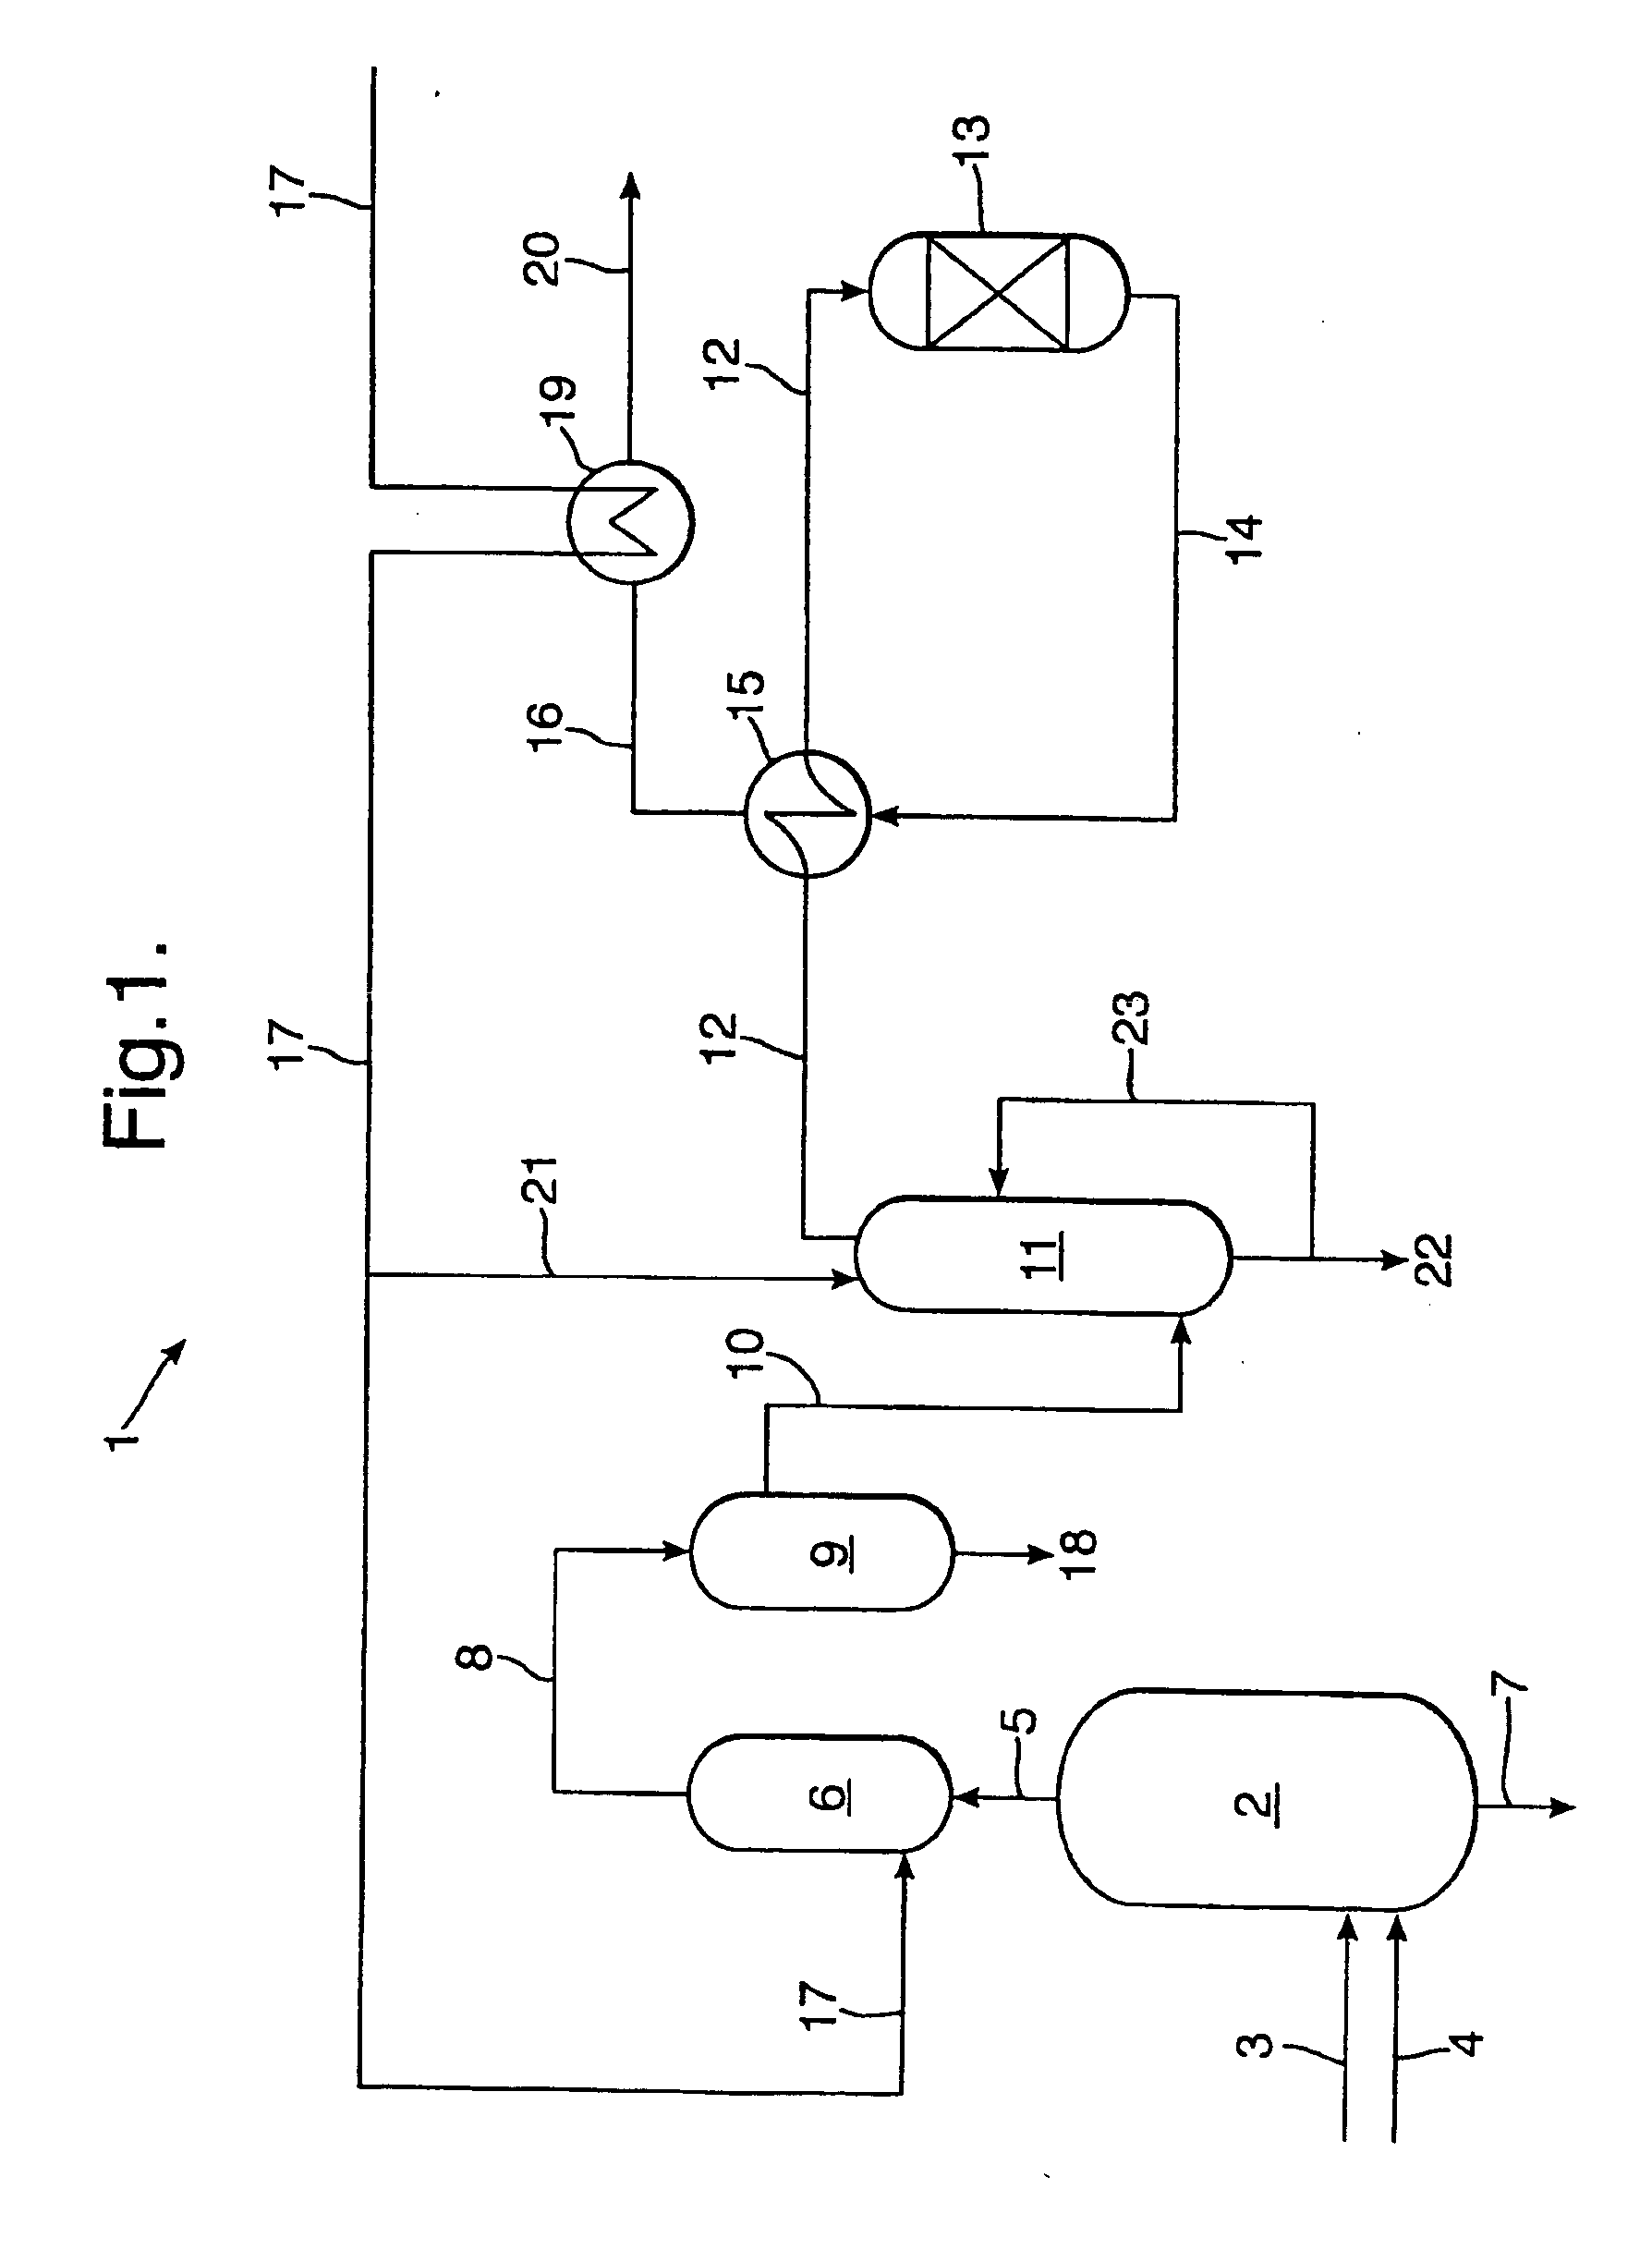 Method and system for producing synthesis gas, gasification reactor, and gasification system